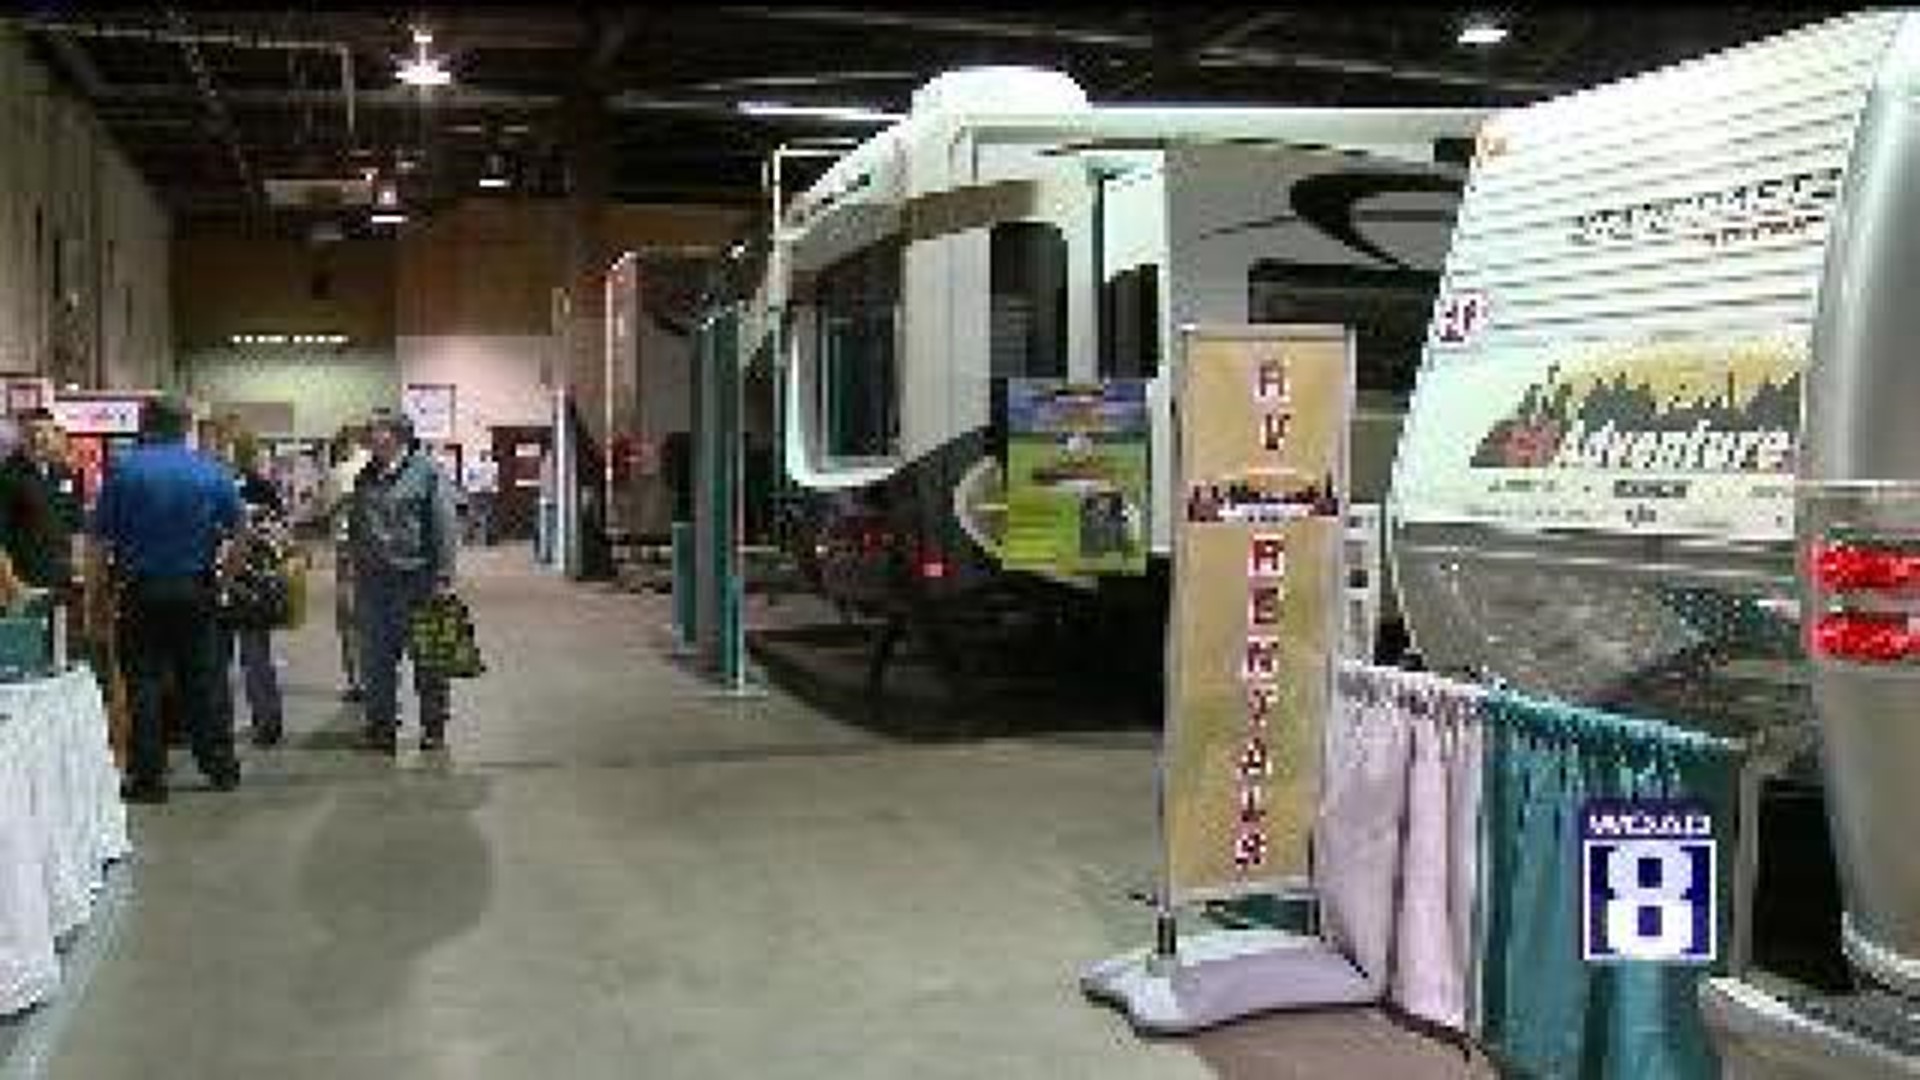 RV and Camping show runs through the weekend